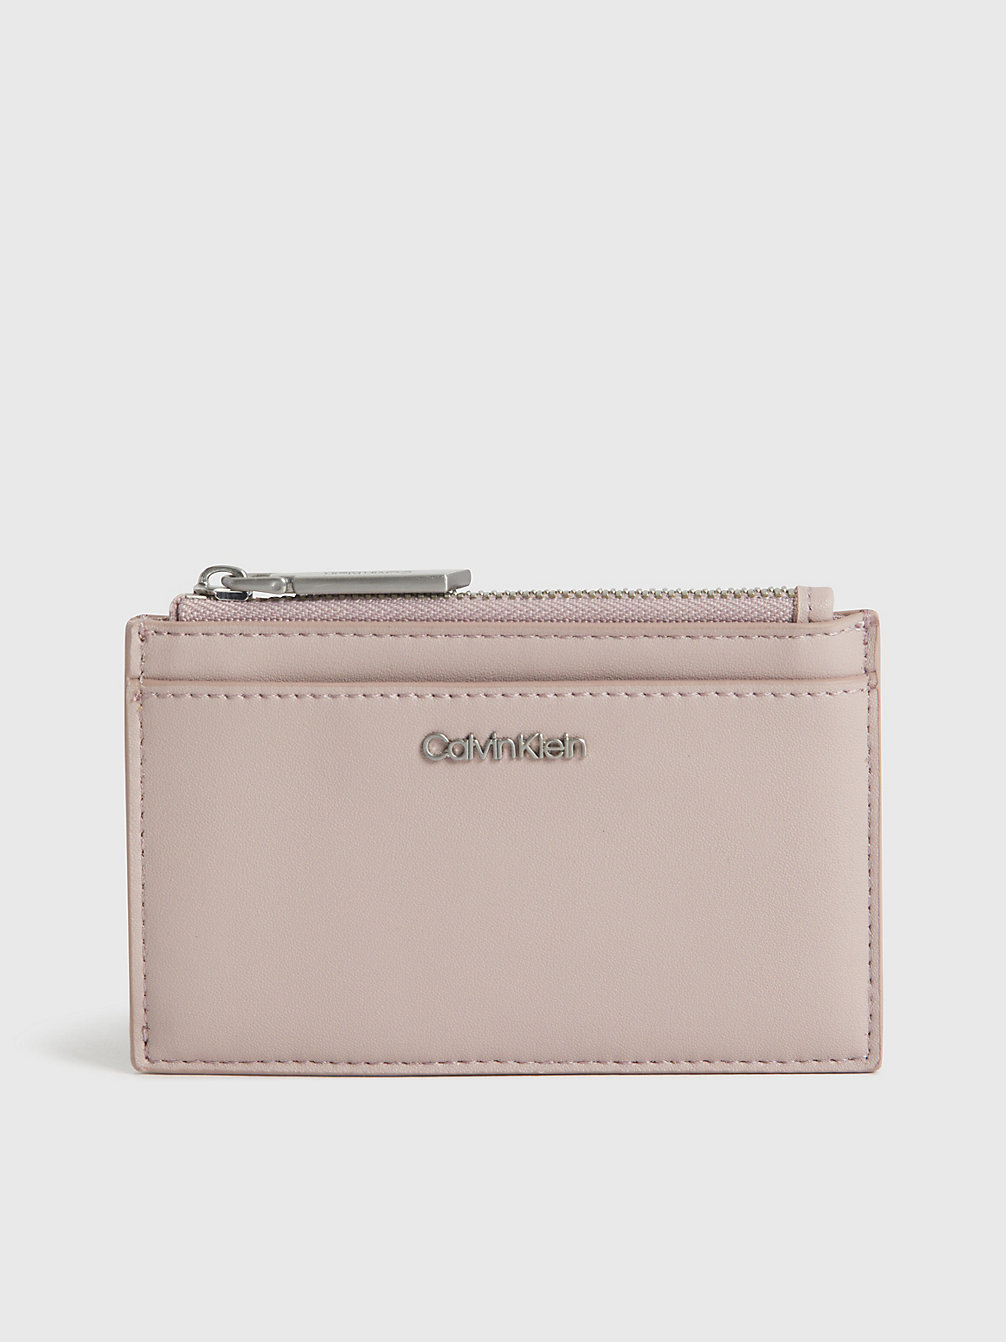 SHADOW GRAY Faux Leather Cardholder undefined women Calvin Klein